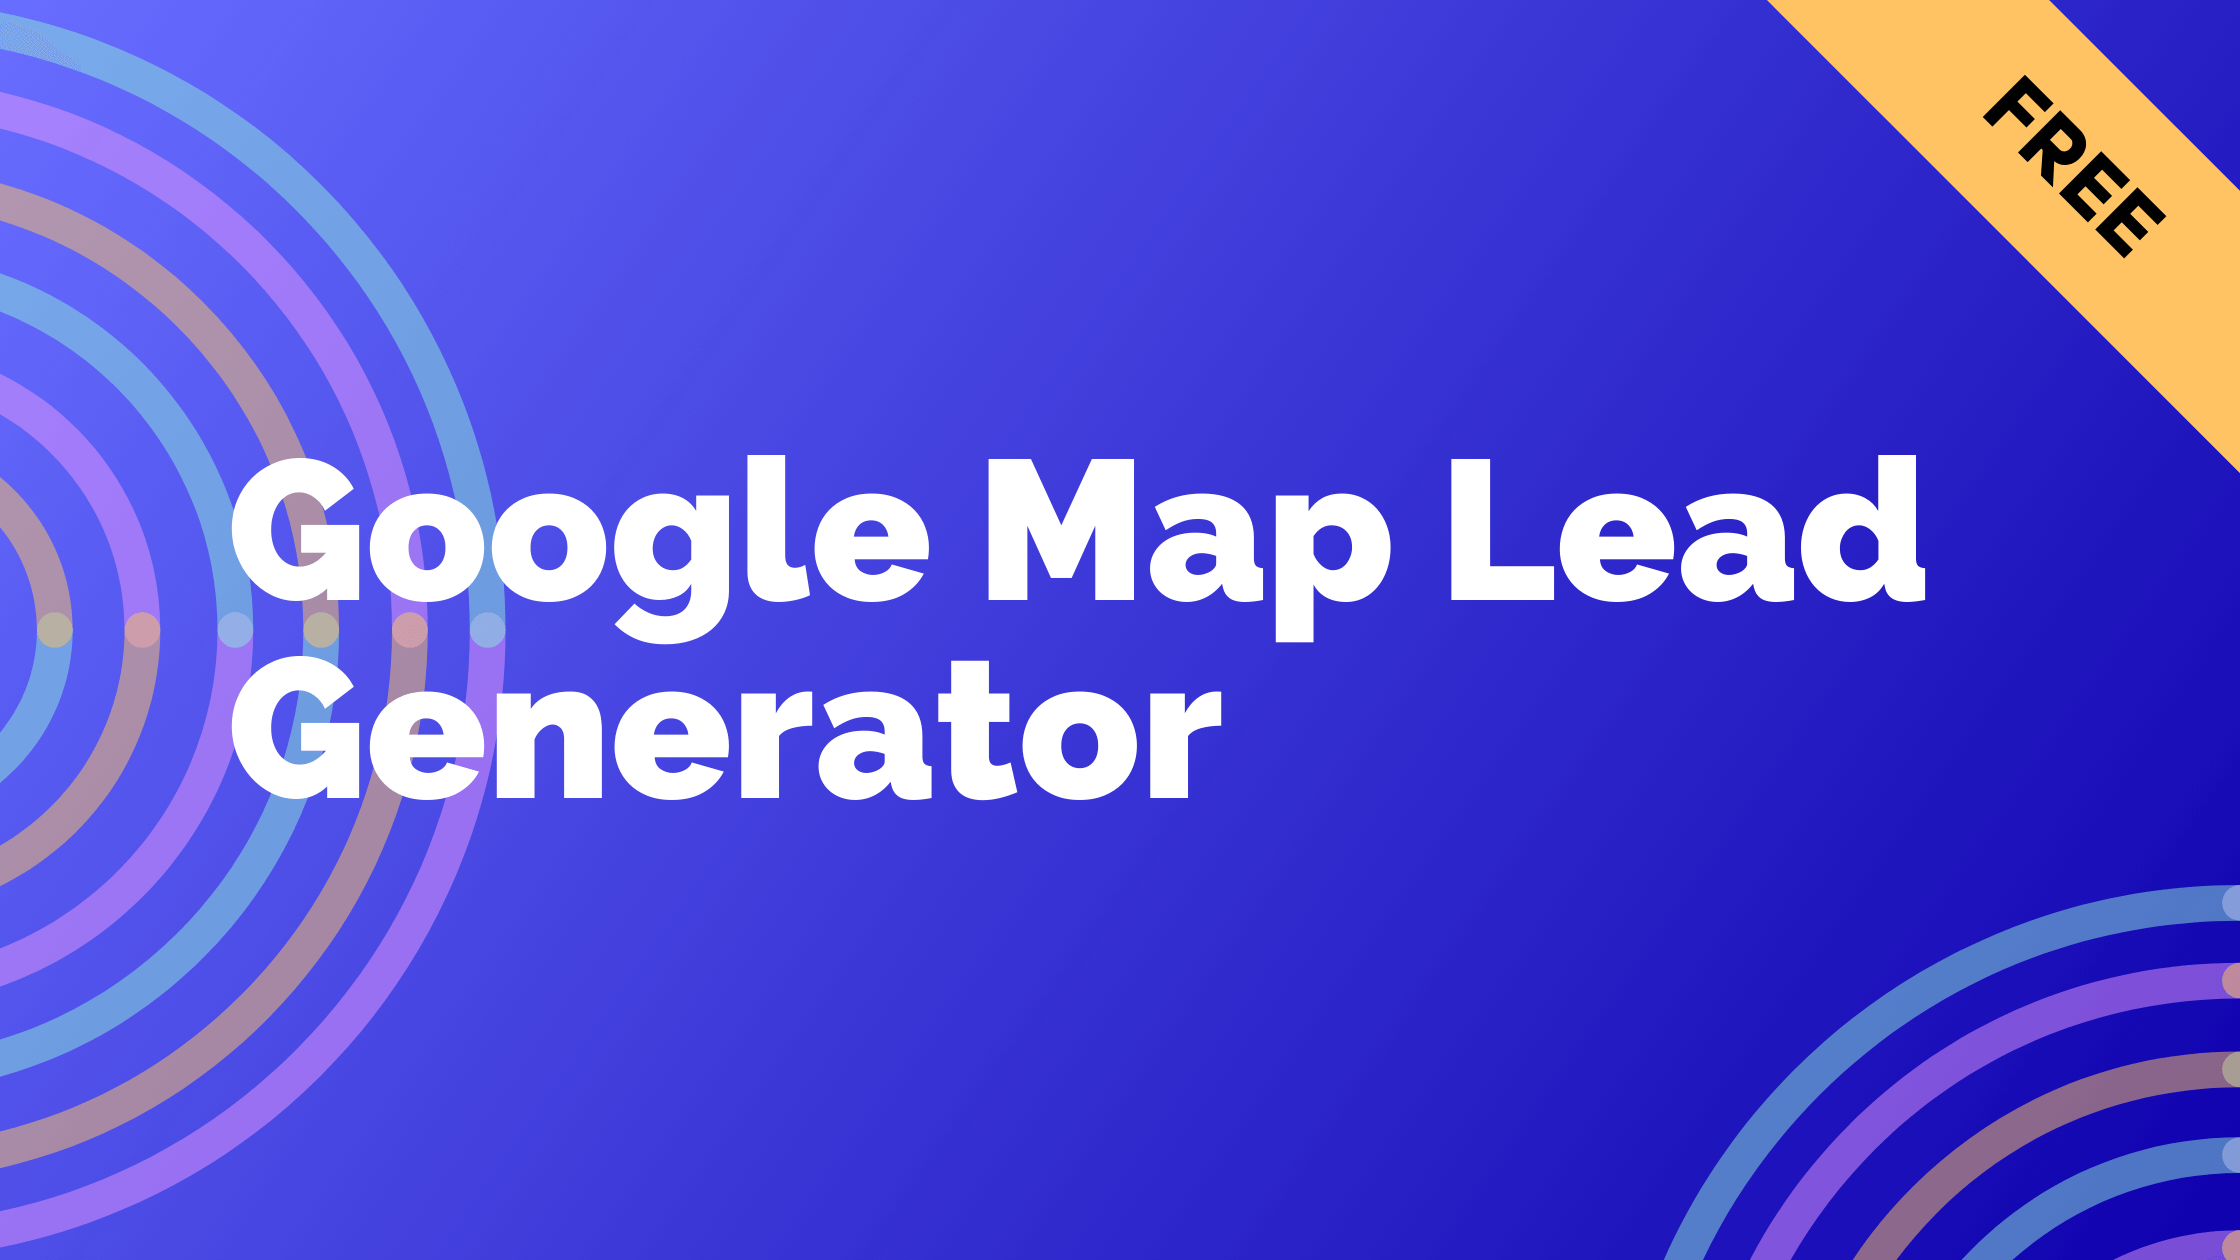 Google Map Lead Generator: What it is & How to Use it?